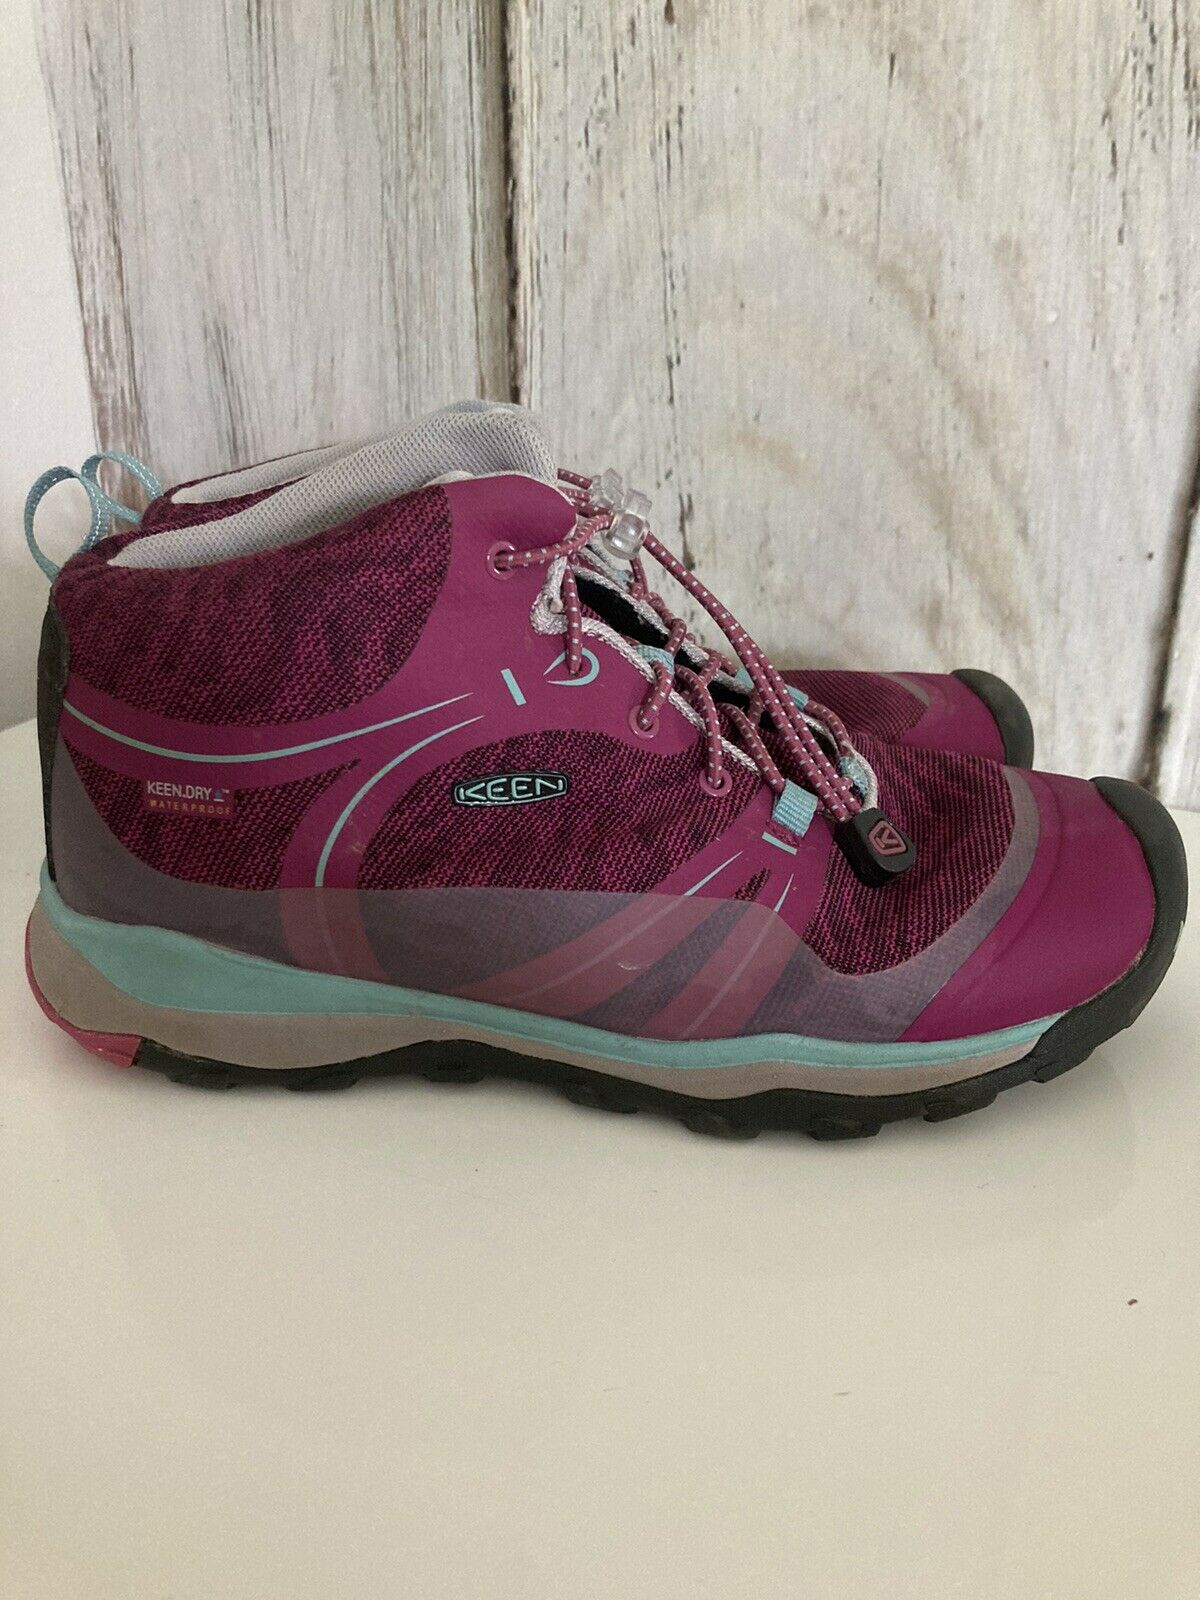 KEEN Terradora Kid’s Size 6 (or Women’s 7.5) Trail Hiking Boots Shoes